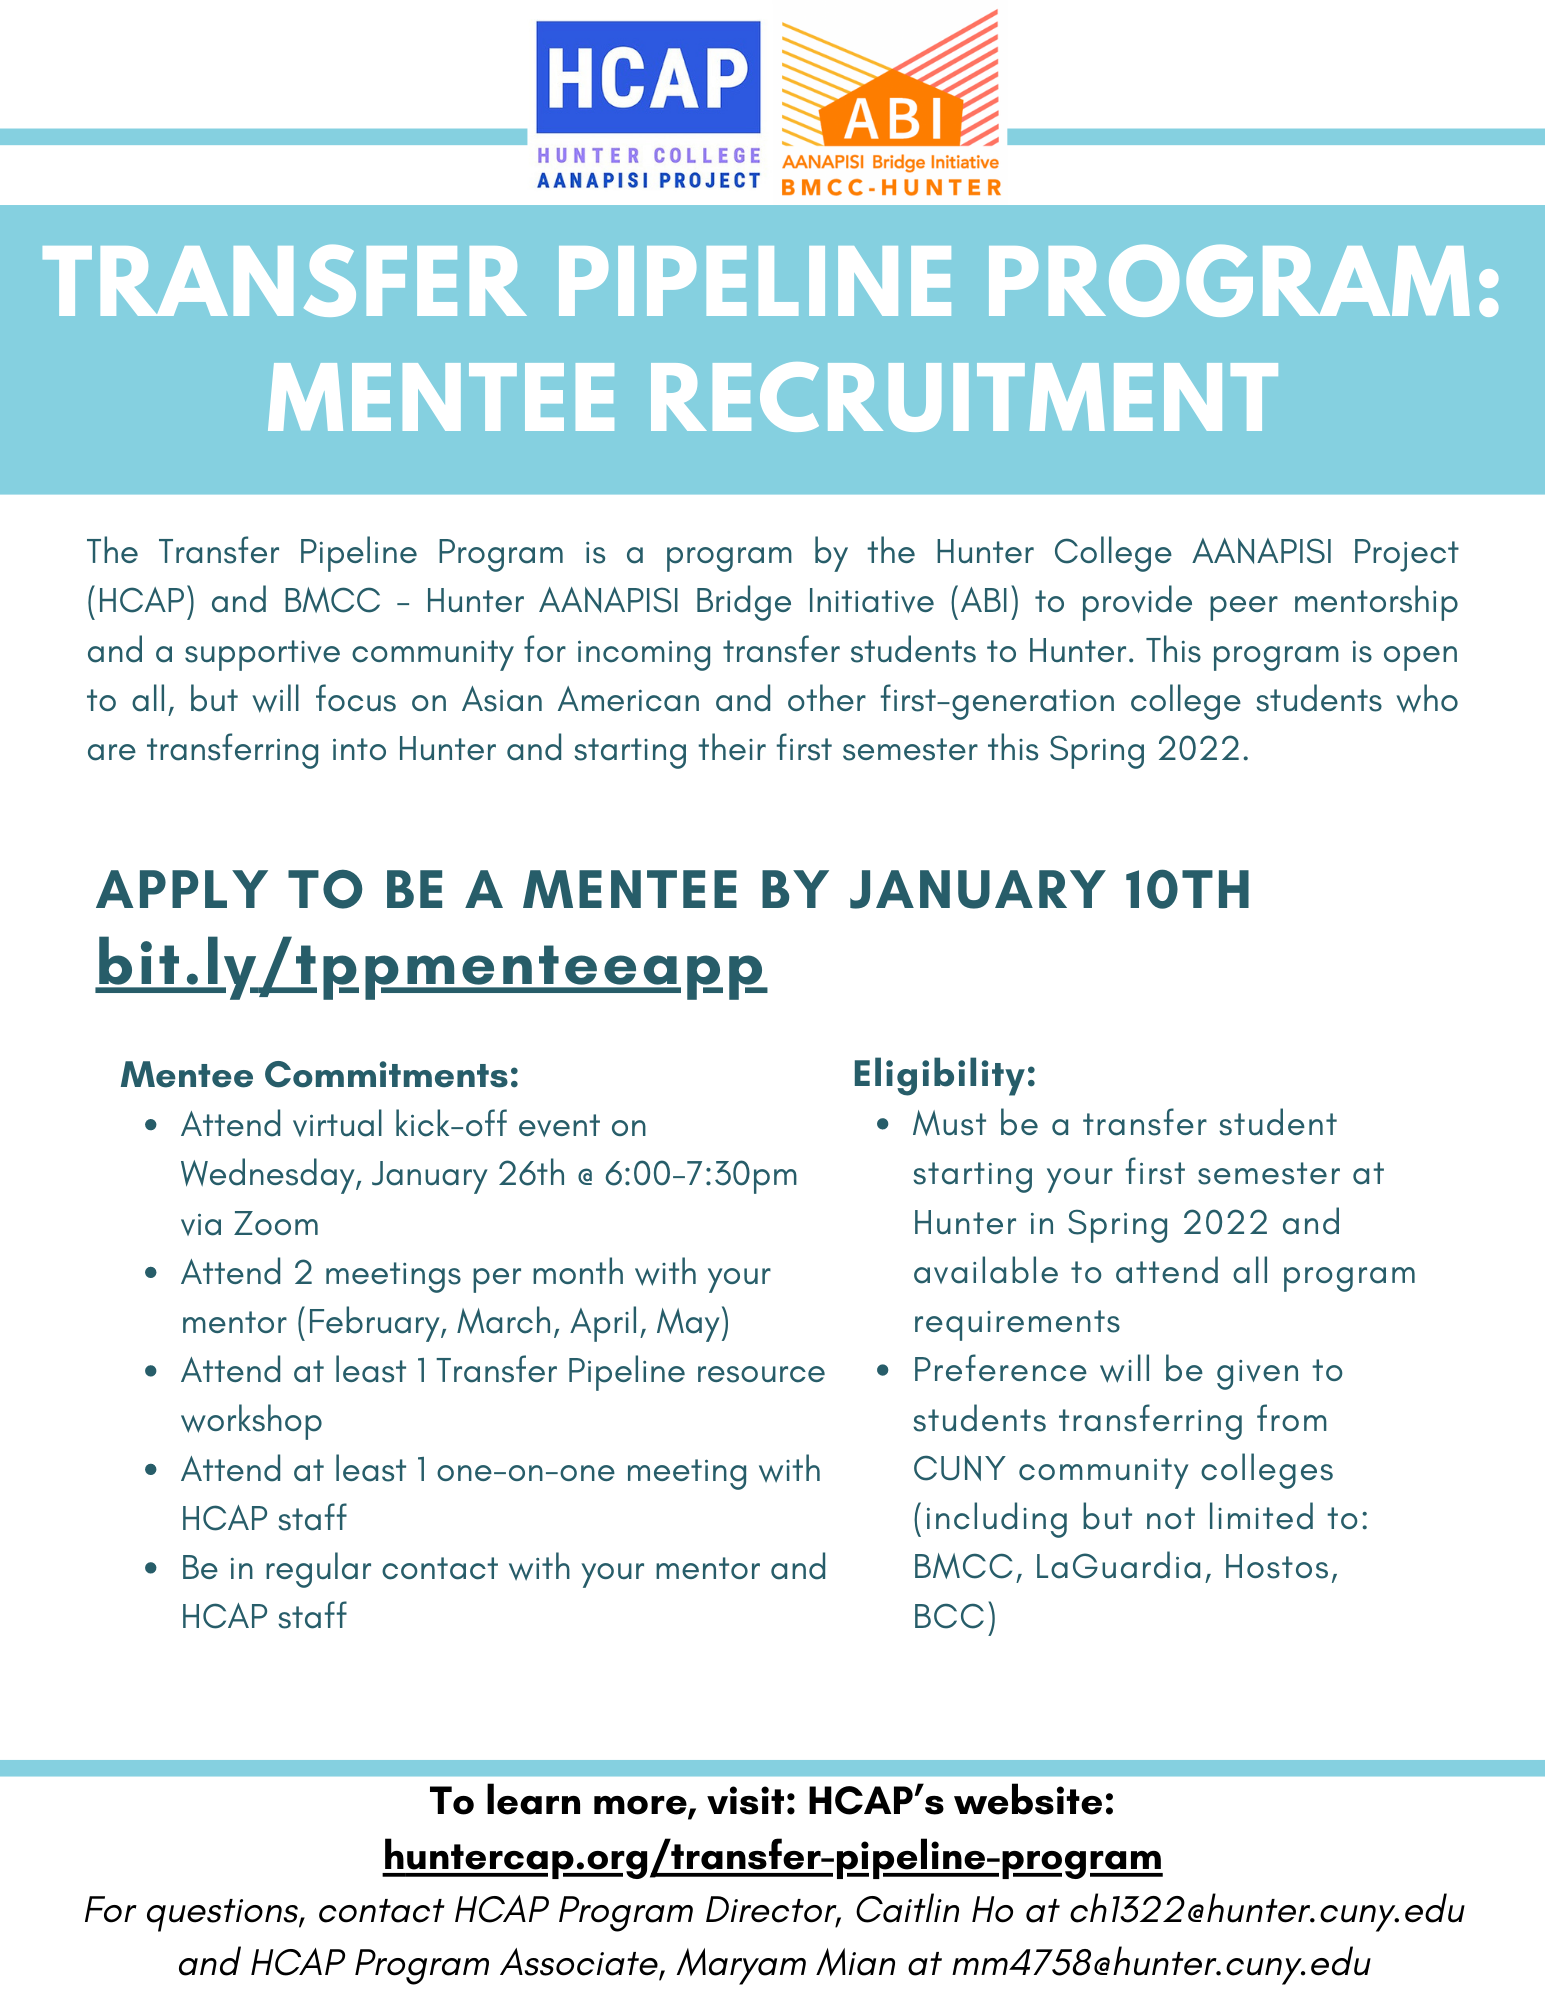 Hunter College Spring 2022 Schedule Apply By 1/10: Transfer Pipeline Program, Peer Mentee | The Hunter College  Aanapisi Project